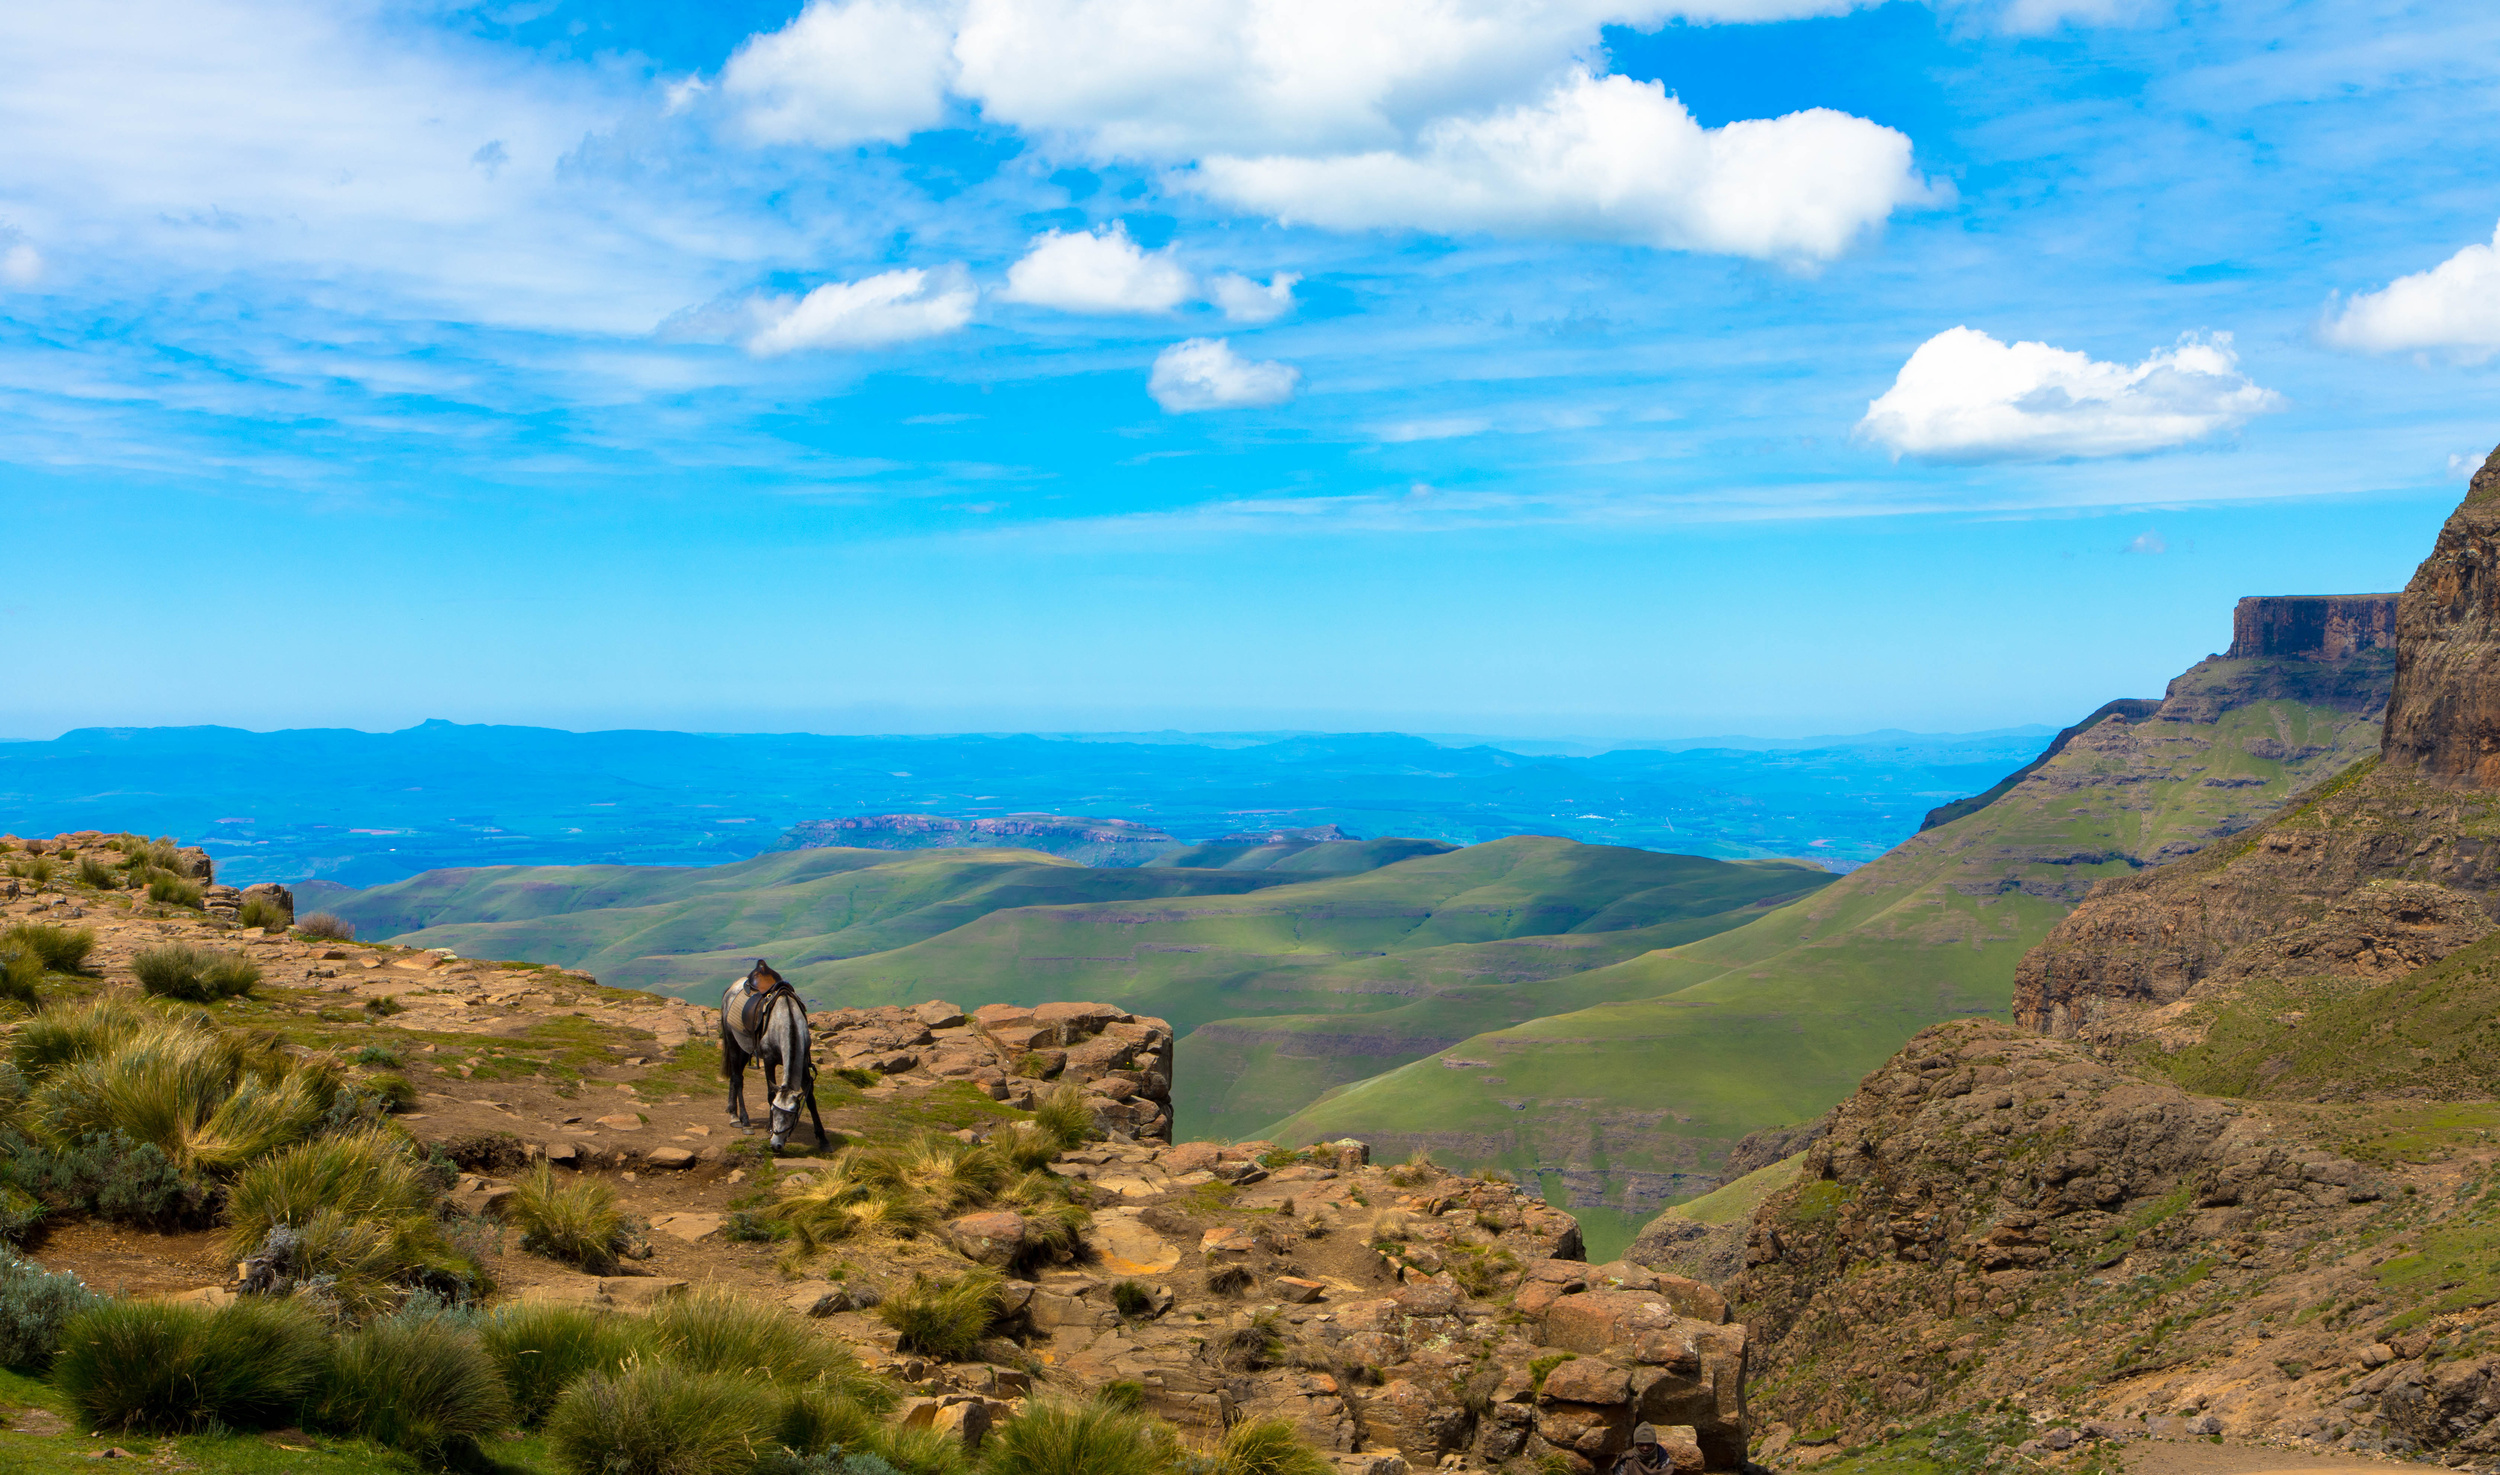 <p>This little-known landlocked country is often overlooked in favor of its neighbor, South Africa. However, Lesotho is the perfect horse trekking destination due to its proximity to the Drakensberg mountains. The entire country is elevated well above sea level, at about 4,600 feet, the views are epic from most points.</p><p><a href='https://www.msn.com/en-us/community/channel/vid-cj9pqbr0vn9in2b6ddcd8sfgpfq6x6utp44fssrv6mc2gtybw0us'>Follow us on MSN to see more of our exclusive lifestyle content.</a></p>